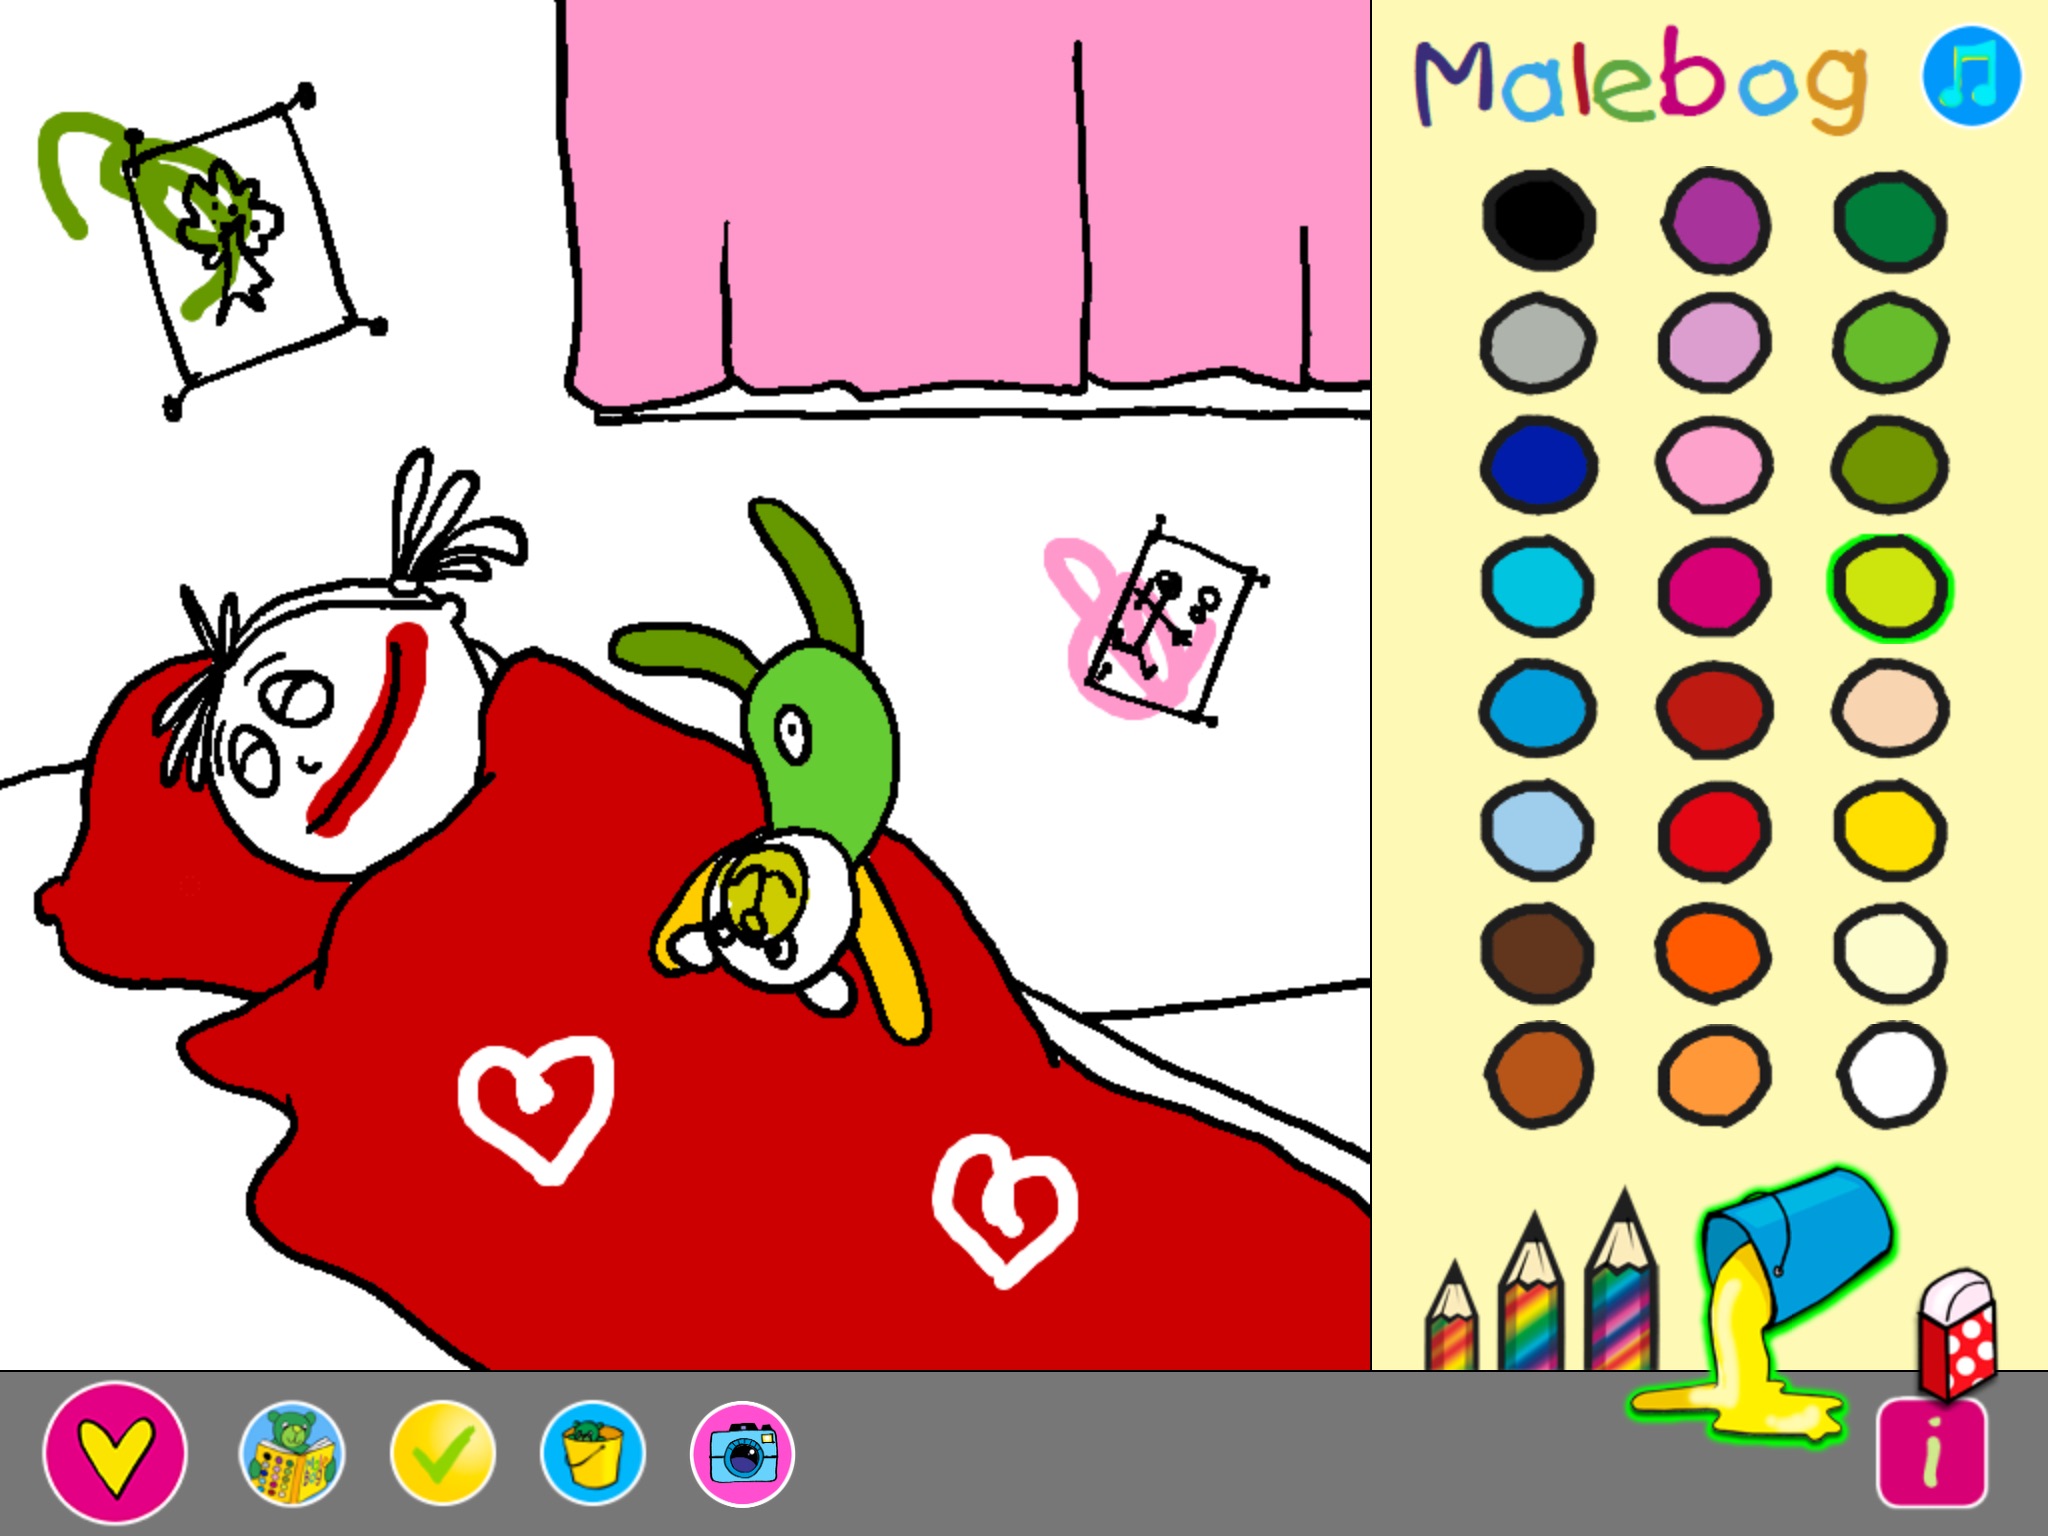 Millie & Teddy children's books - read, play and paint screenshot 2